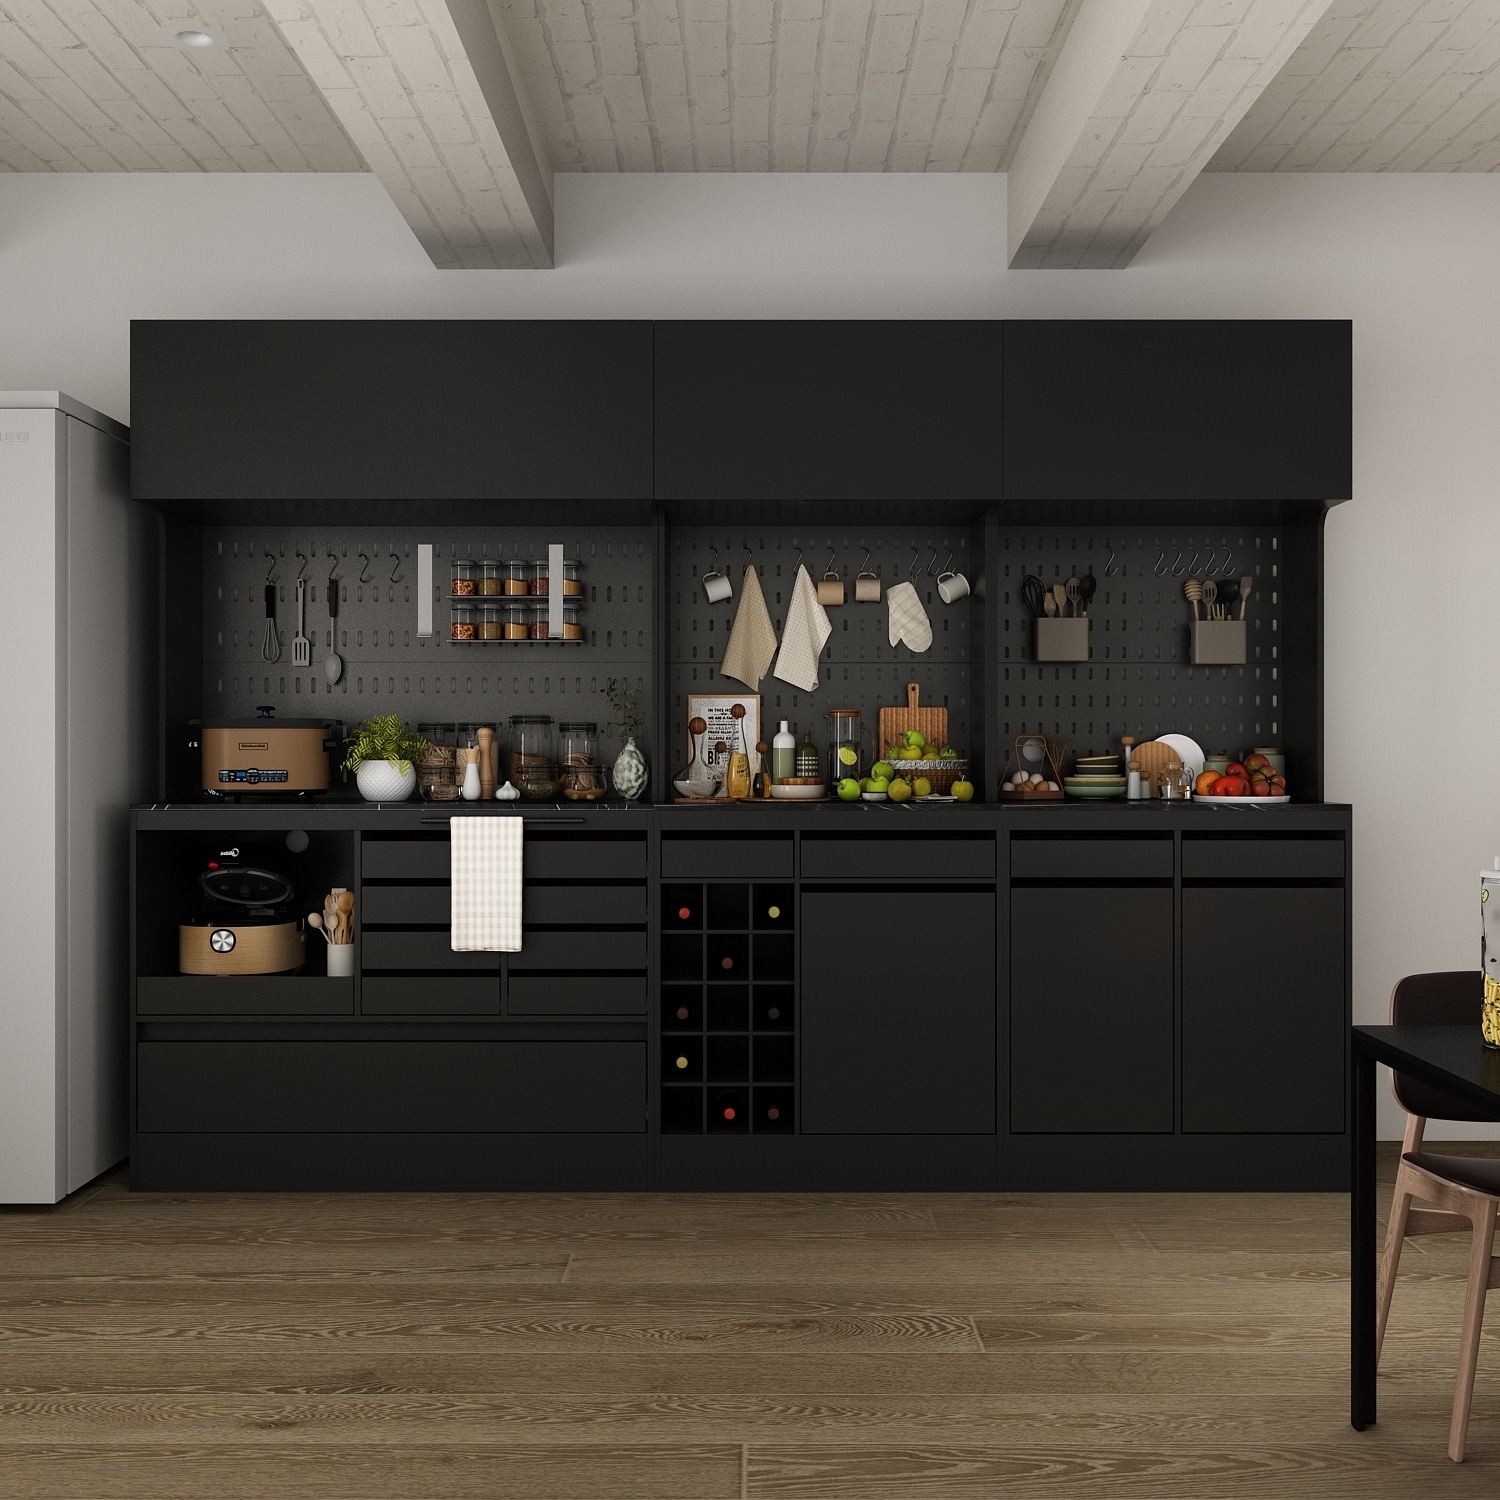 https://ak1.ostkcdn.com/images/products/is/images/direct/326ccfde7b9fb91d1660335d0ee23857de4c653b/Modular-Kitchen-Pantry-Hutch-4-in-1-Pantry-Cabinet-Storage-Cupboard.jpg